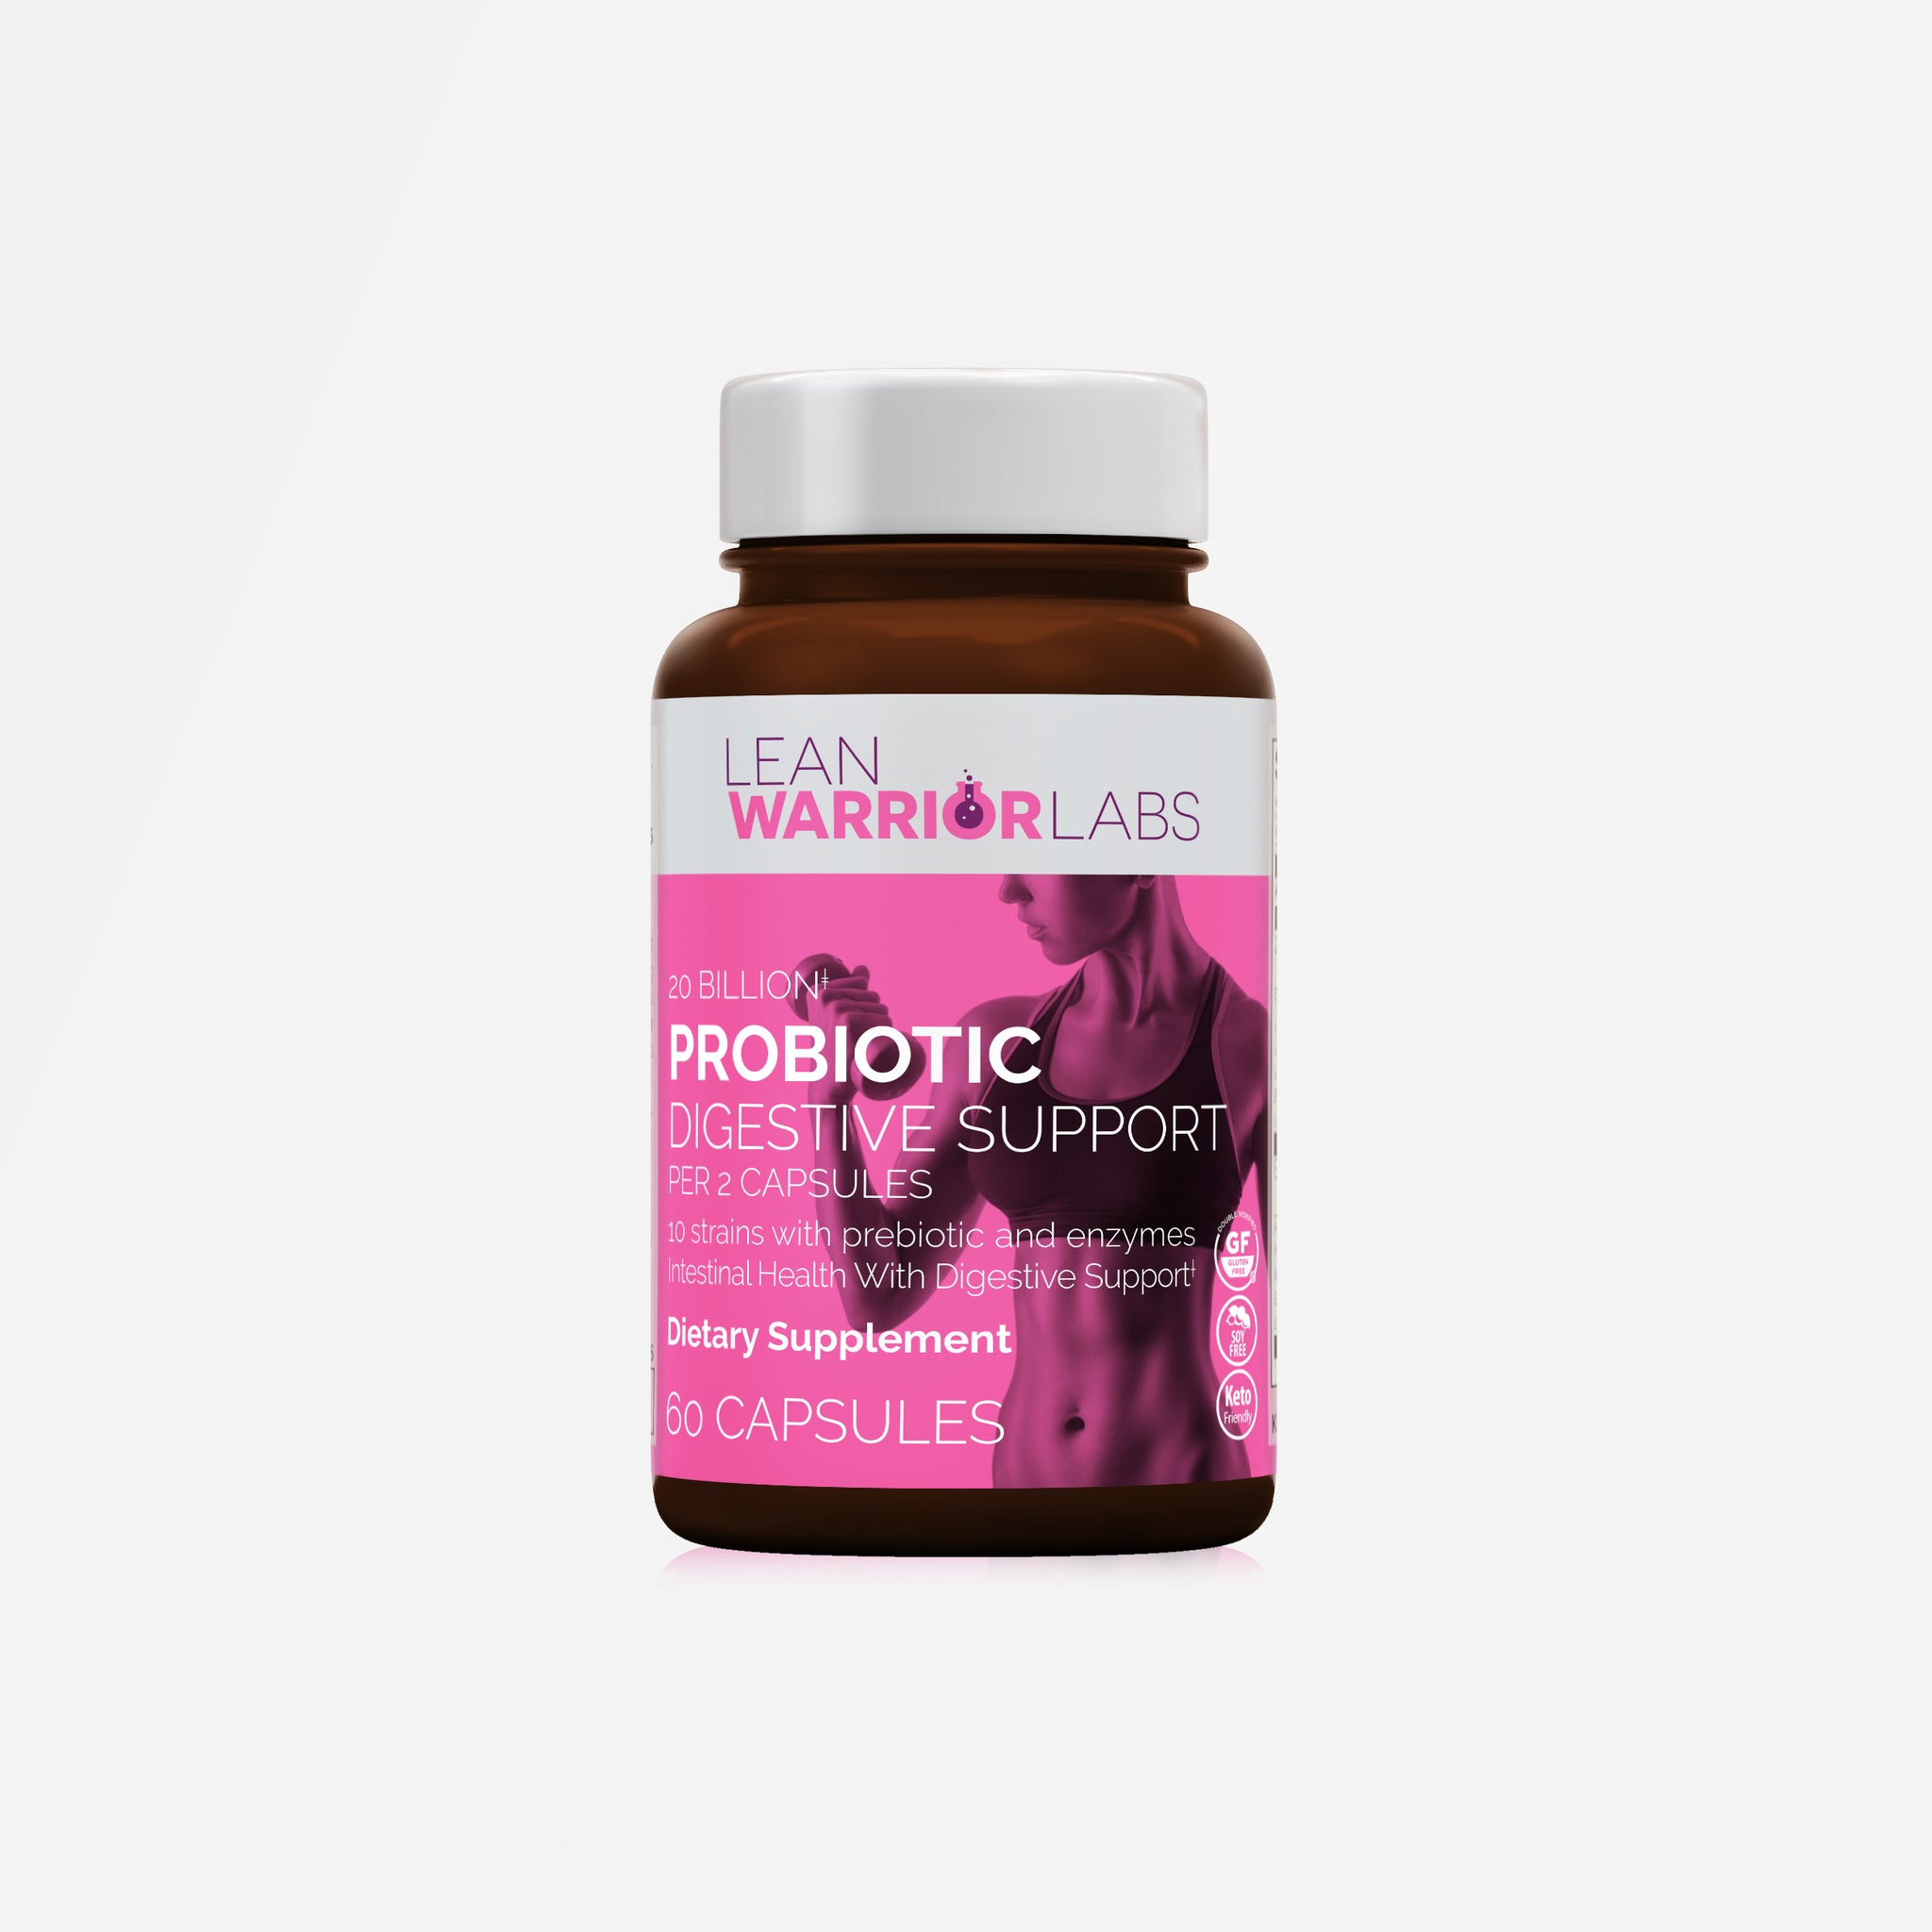 Probiotic Digestive Support